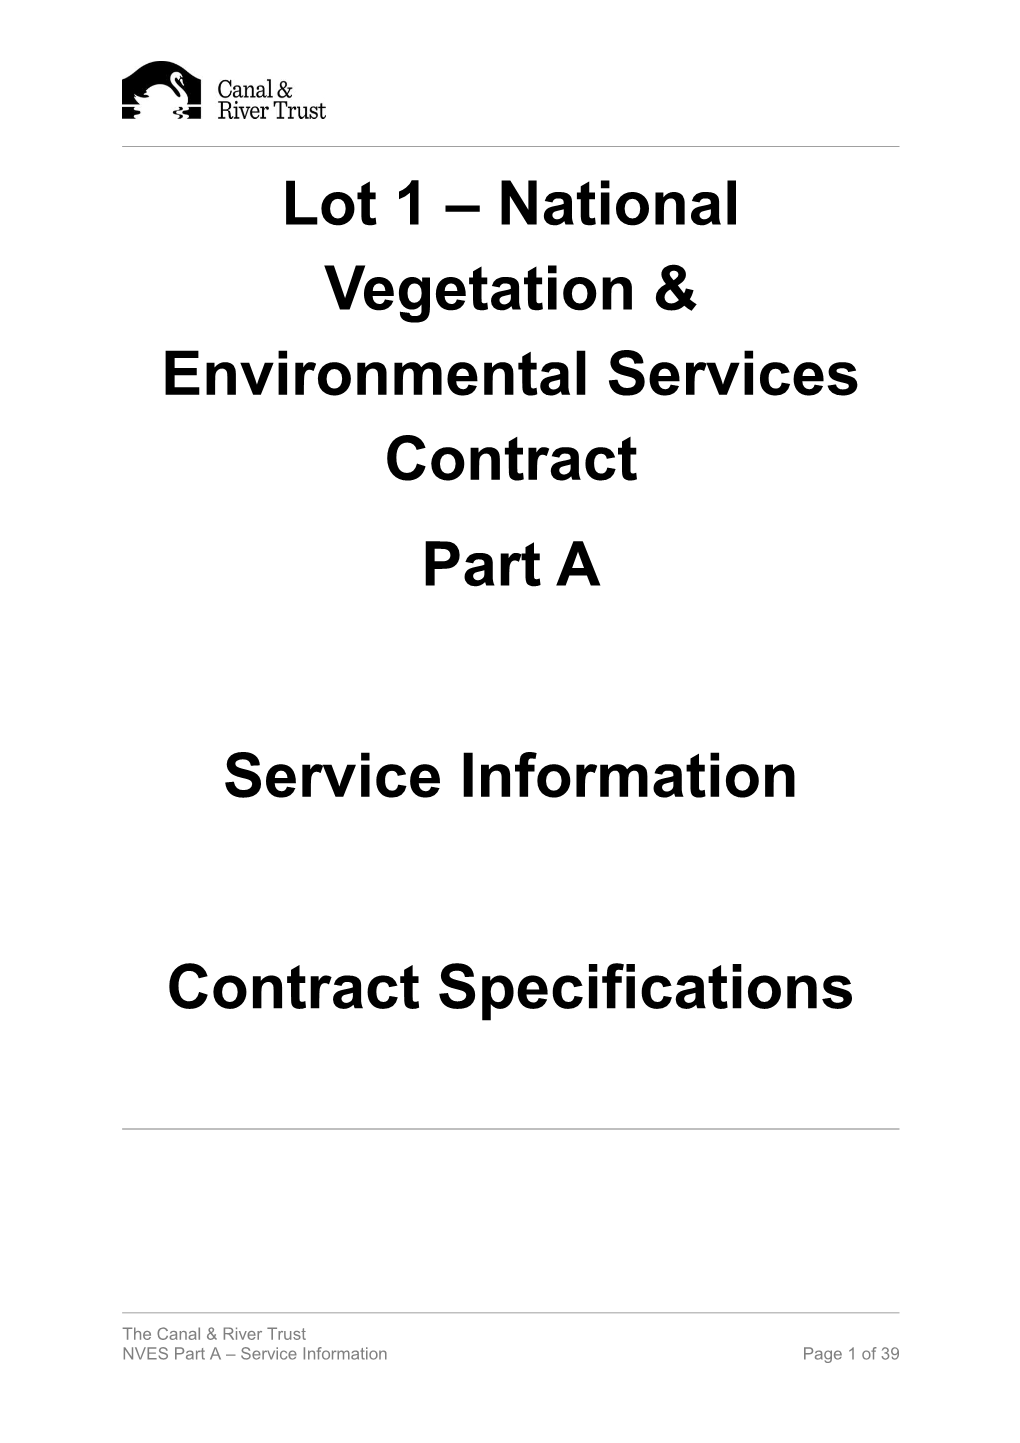 Lot 1 National Vegetation & Environmental Services Contract